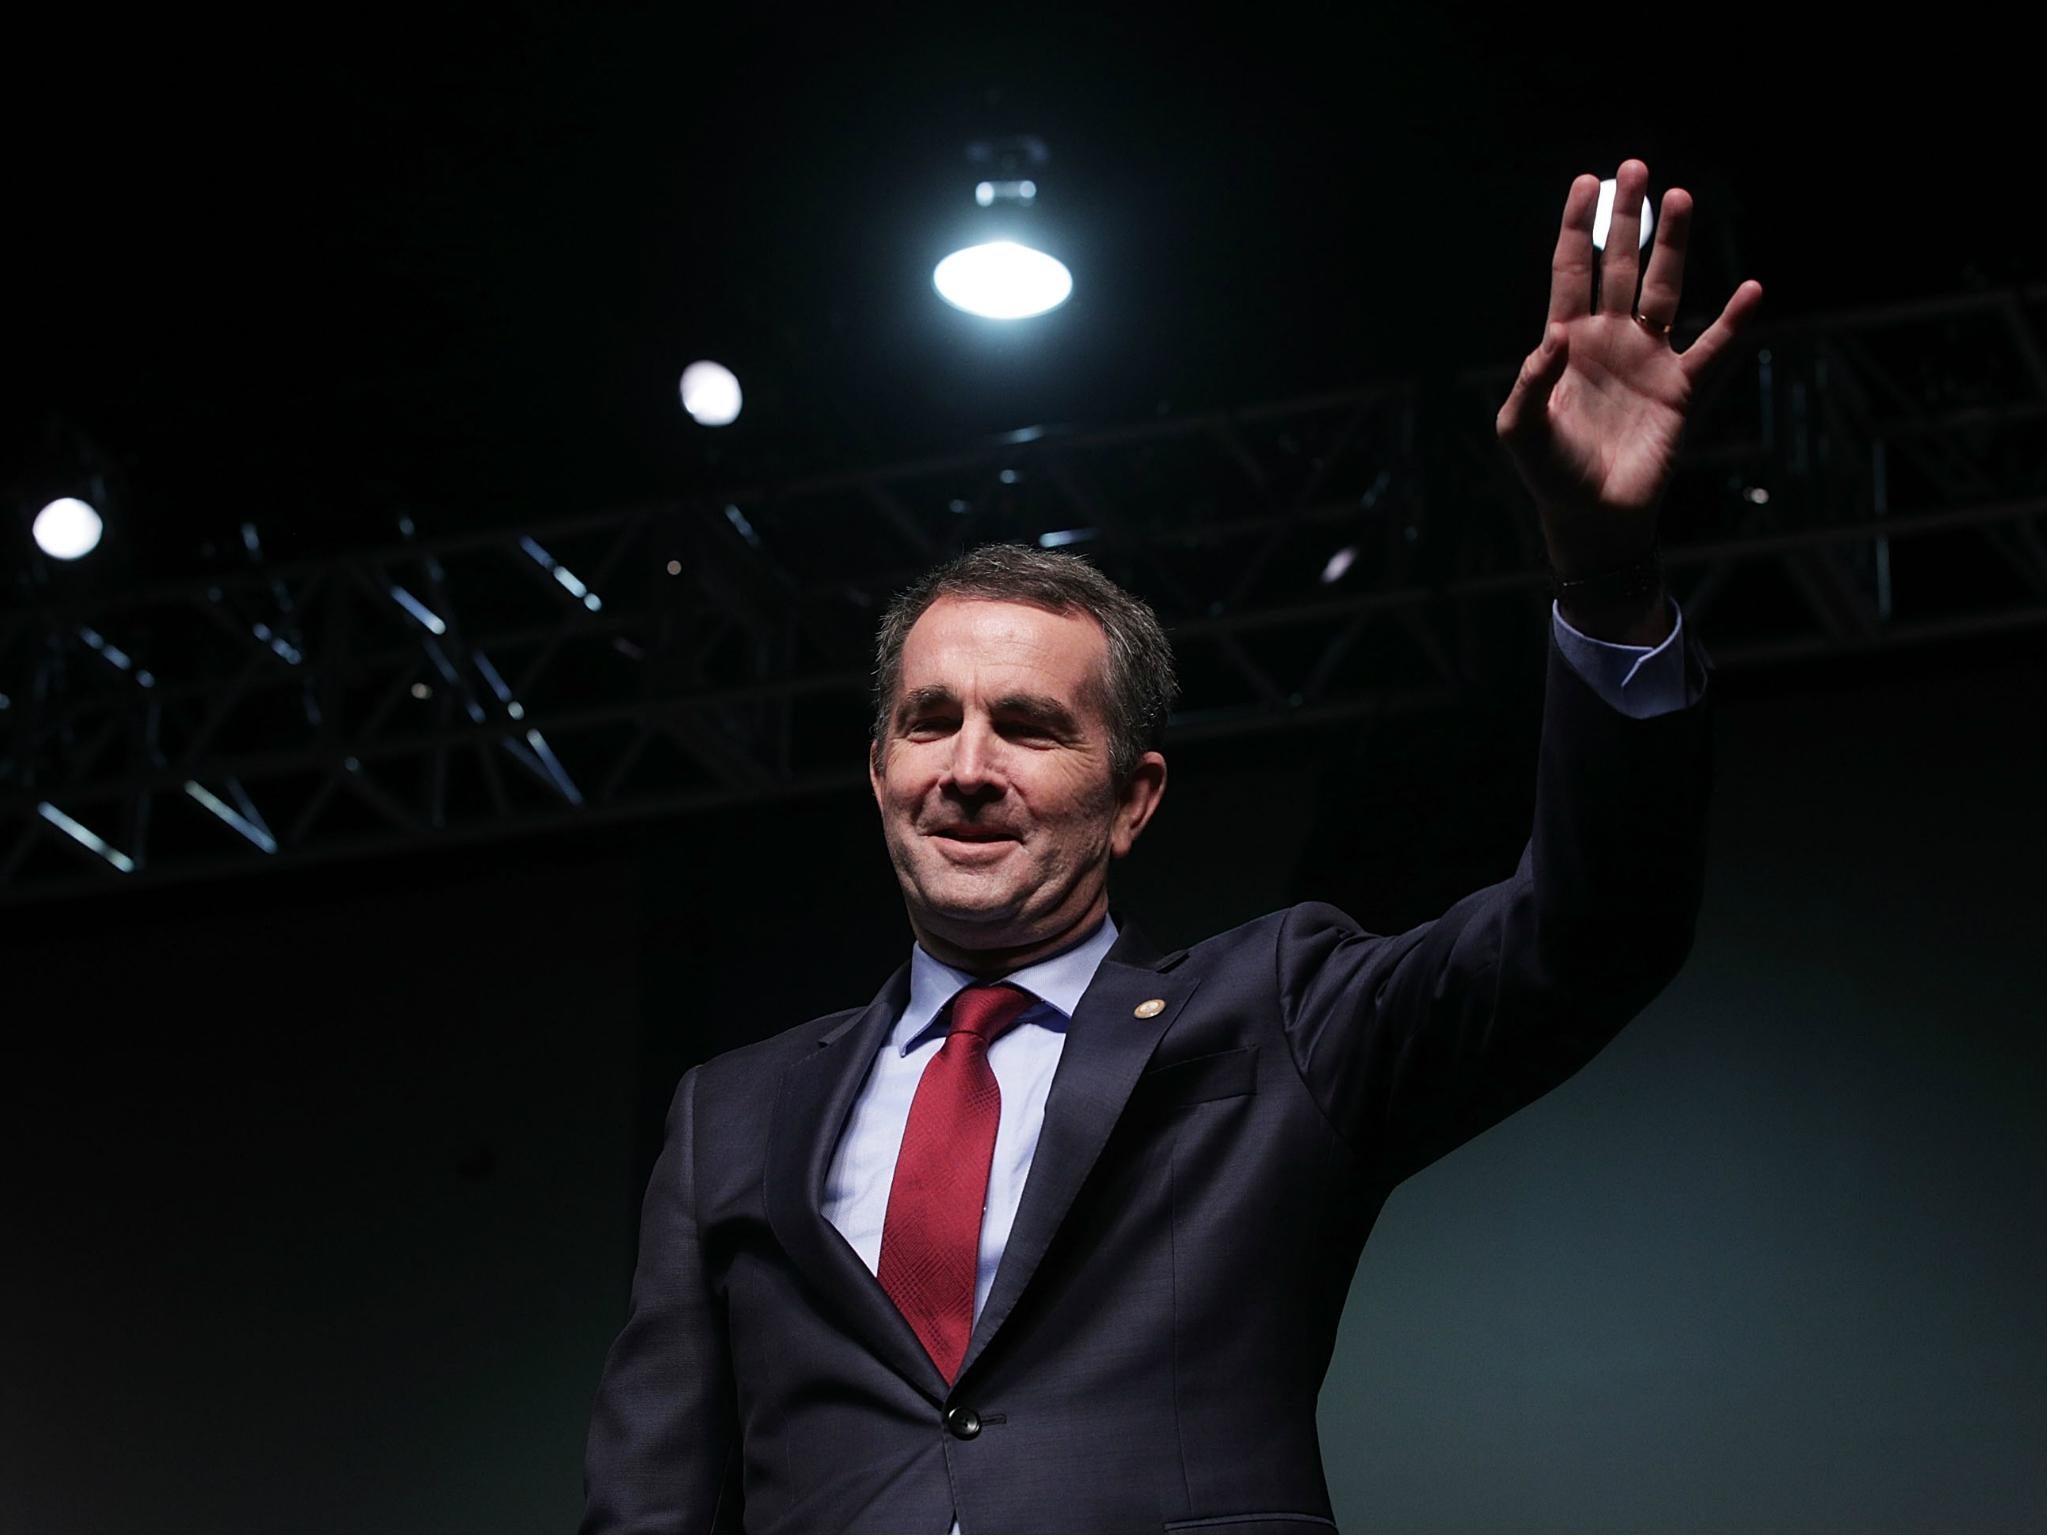 Democratic gubernatorial candidate and Virginia Lieutenant Governor Ralph Northam waves during a campaign event at 19 October 2017 in Richmond, Virginia.